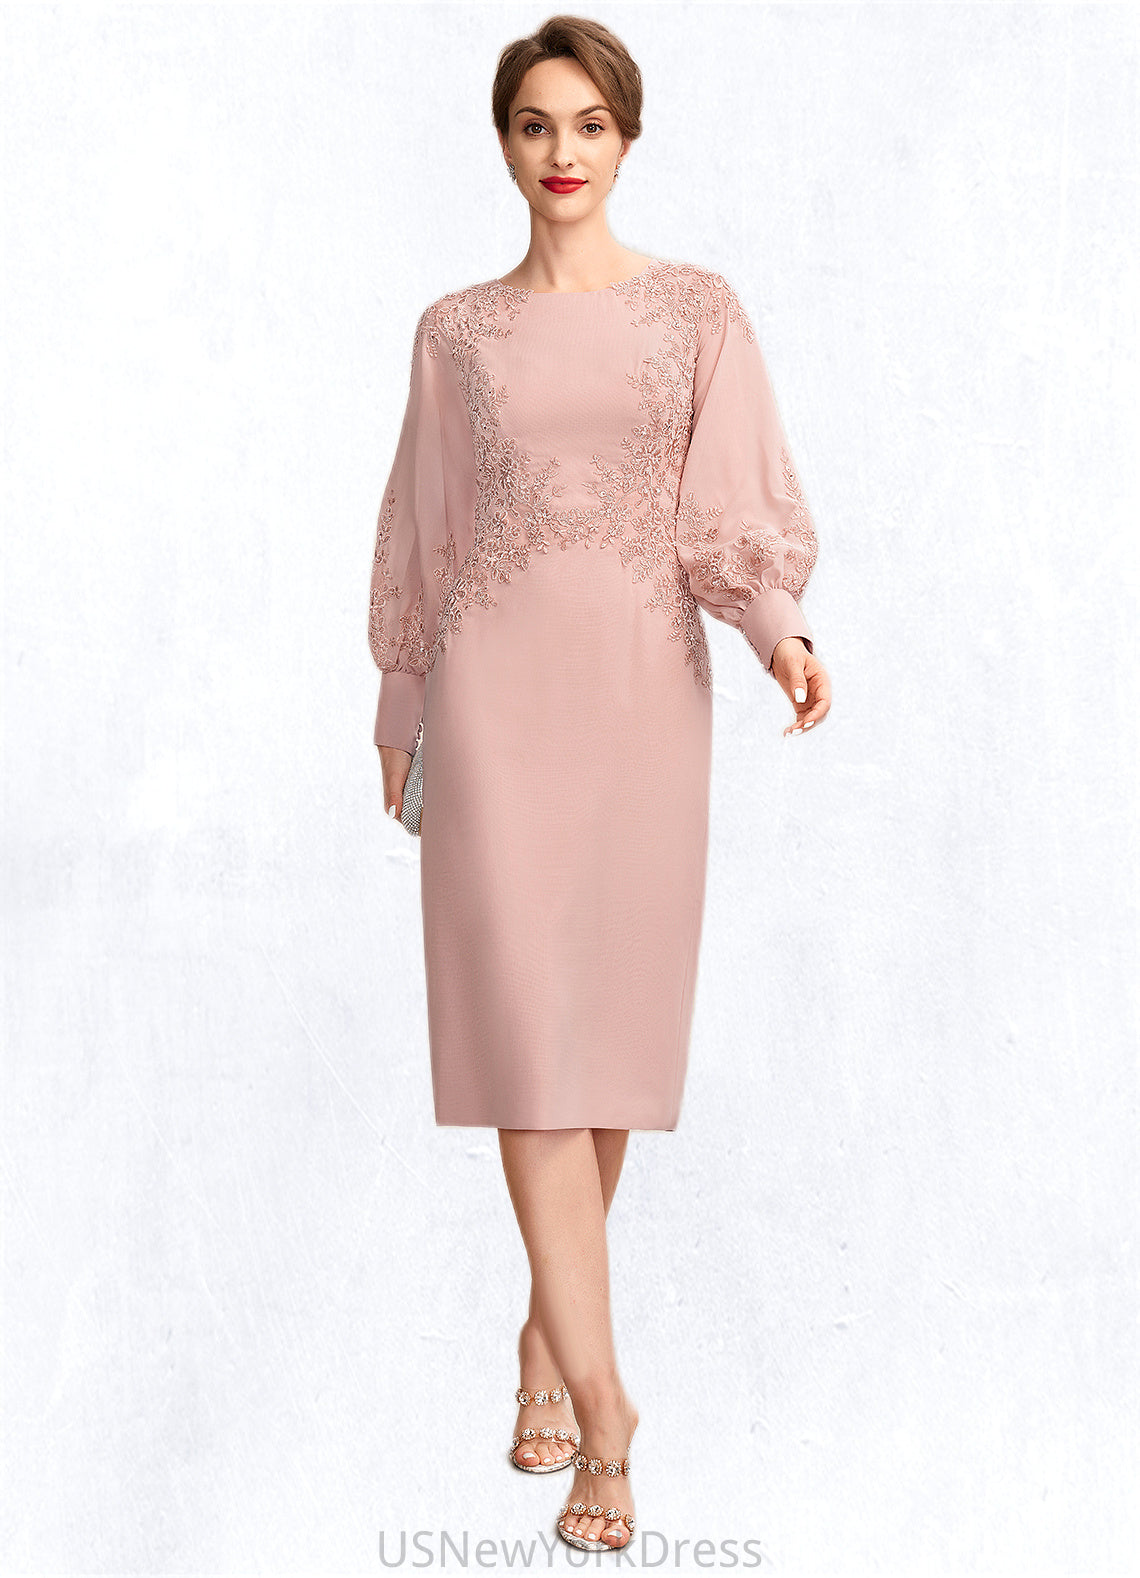 Kiara Sheath/Column Scoop Neck Knee-Length Chiffon Lace Mother of the Bride Dress With Beading Sequins DJ126P0015020